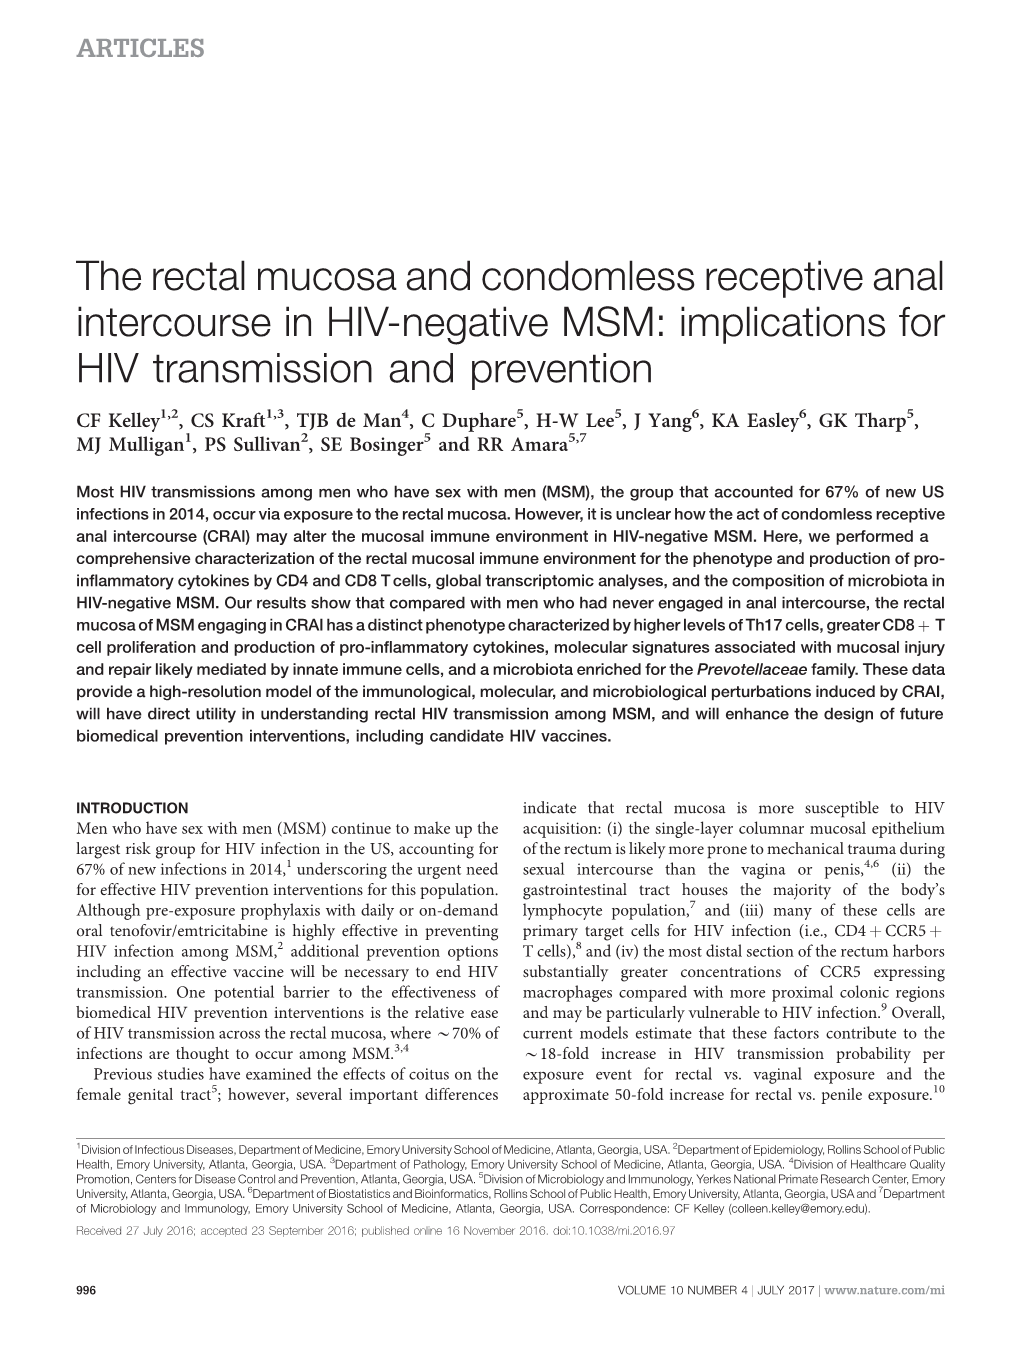 The Rectal Mucosa and Condomless Receptive Anal Intercourse in HIV-Negative MSM: Implications for HIV Transmission and Prevention